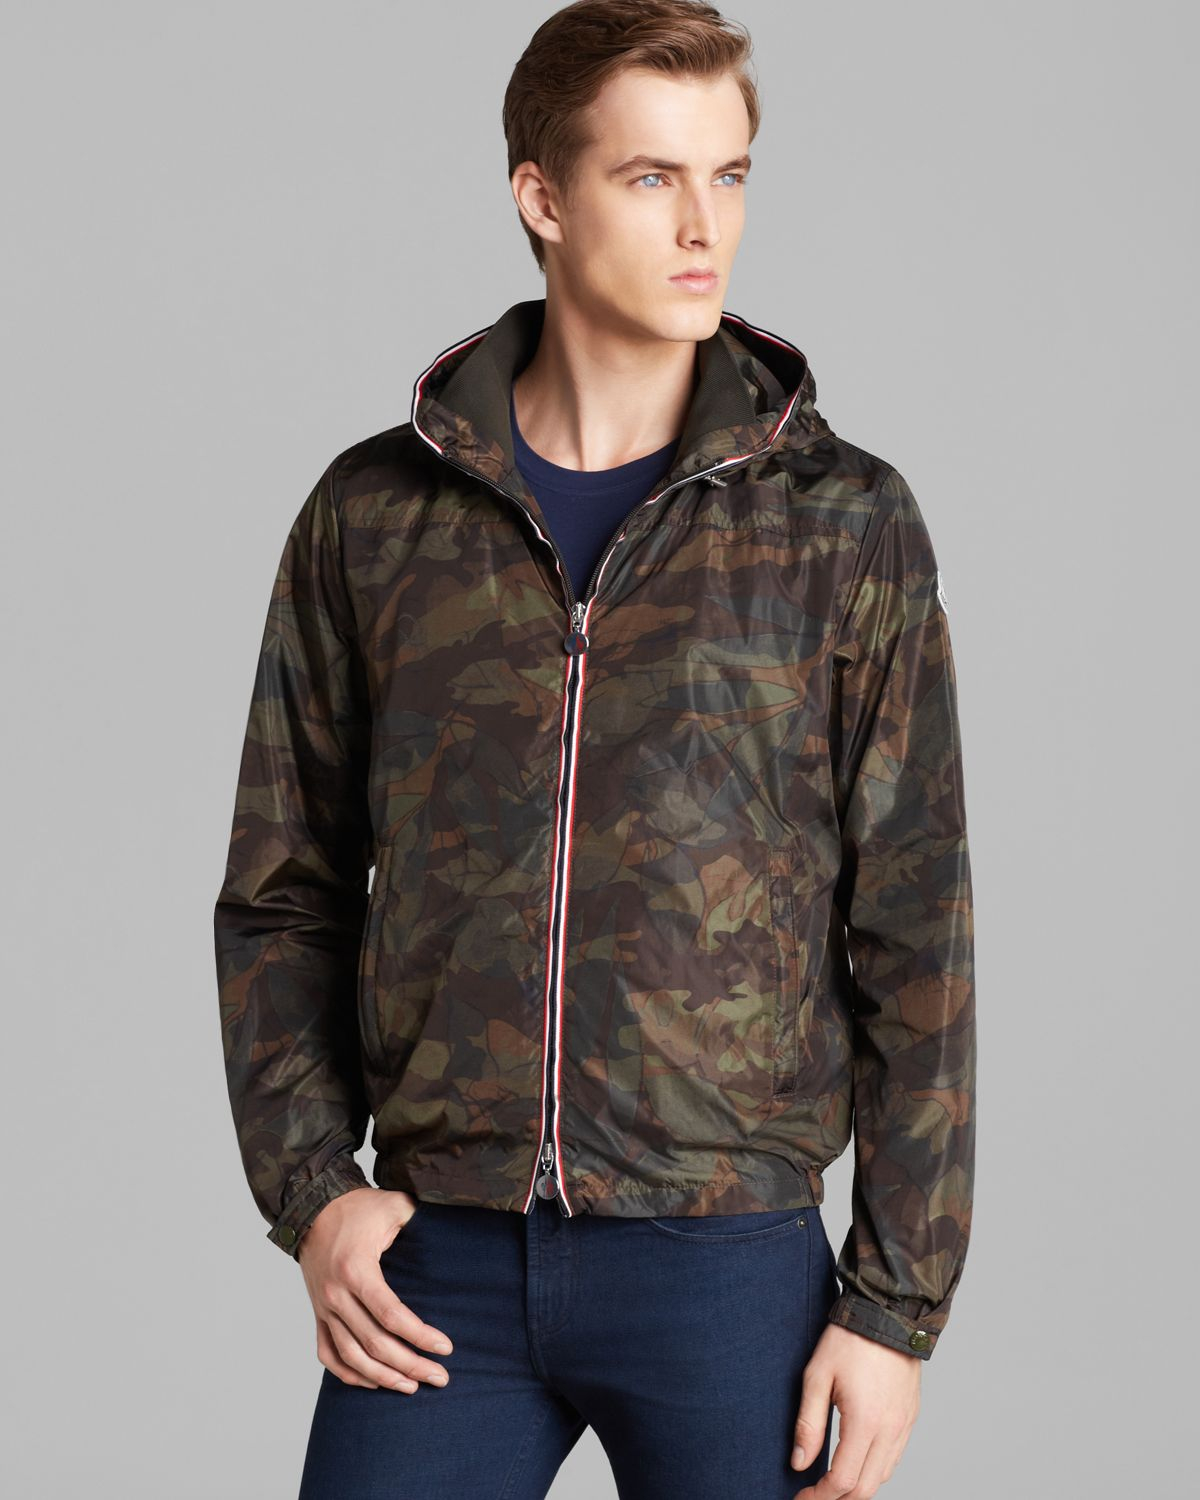 Lyst - Moncler Nath Camo Lightweight Jacket in Green for Men